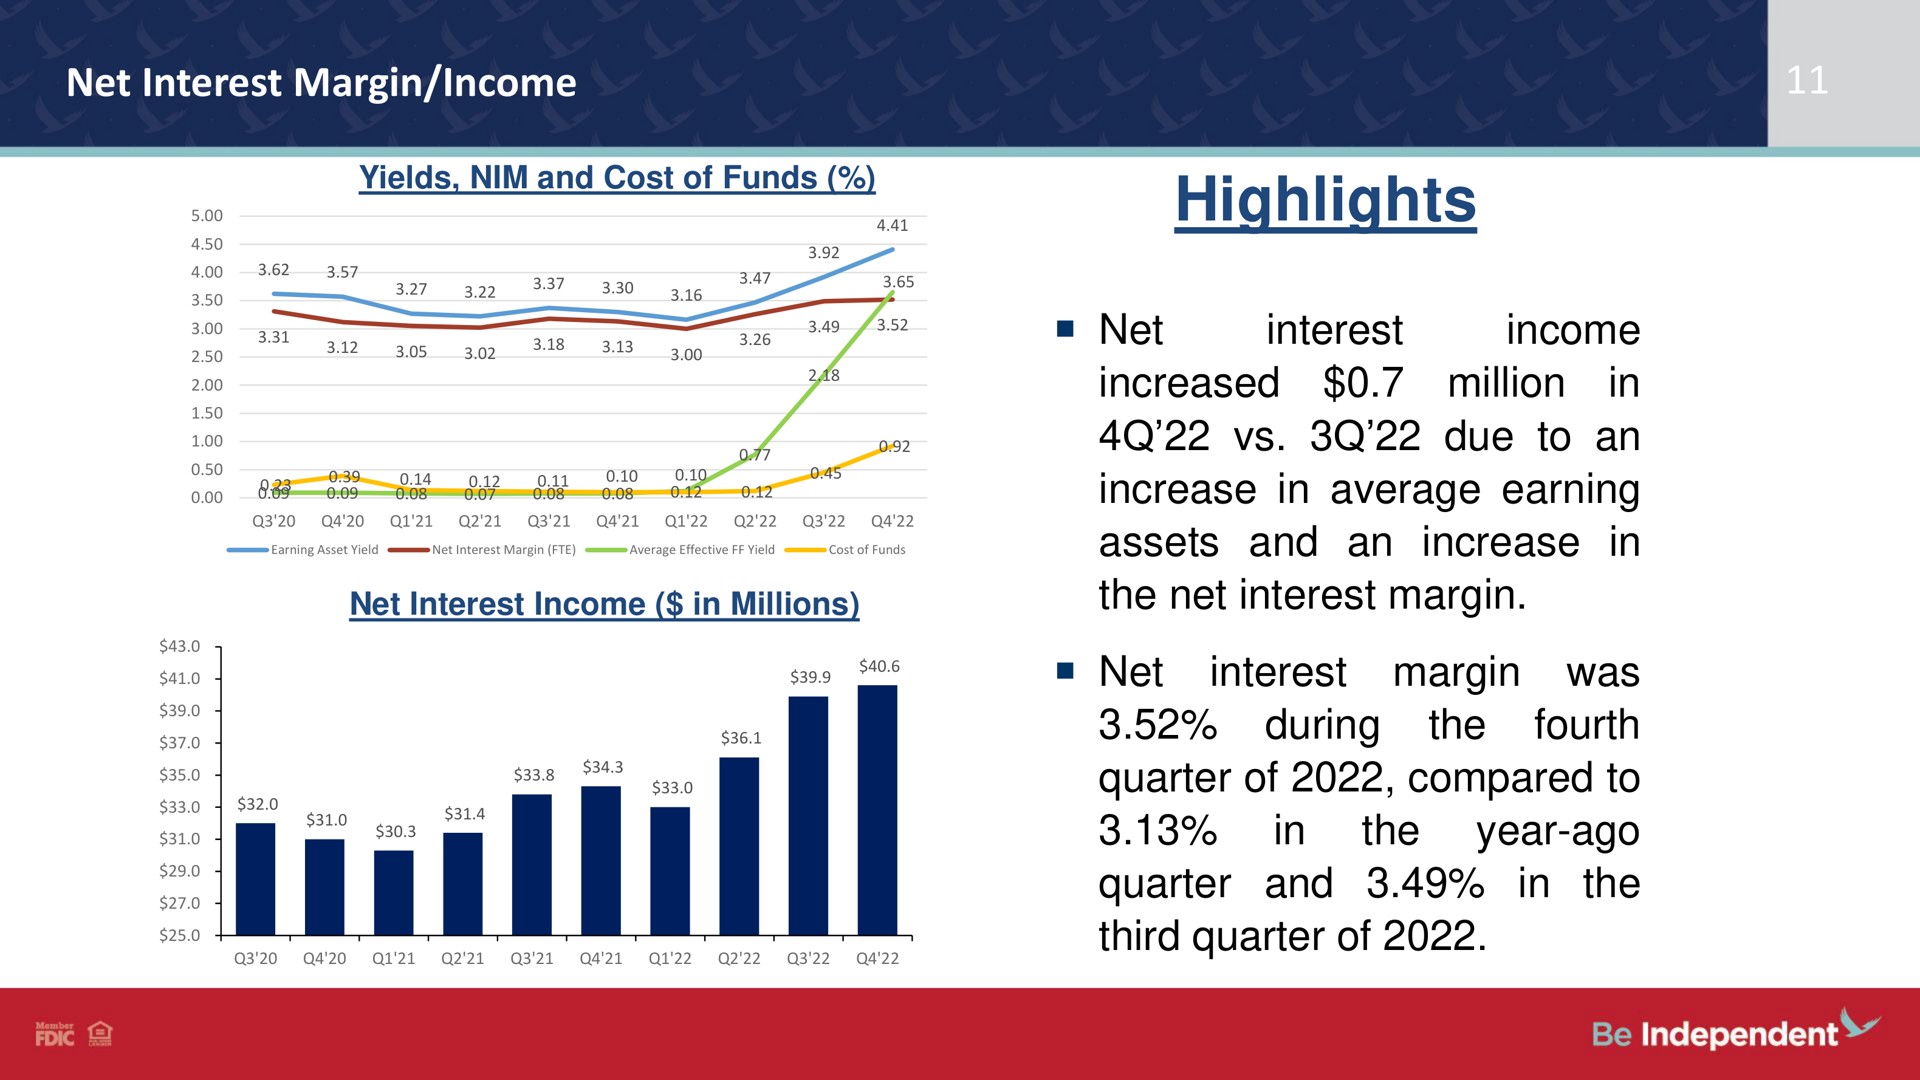 net interest margin income highlights net interest income increased million in due to an increase in average earning assets and an increase in the net interest margin net the interest margin was fourth during quarter of compared to year ago the in quarter and in the third quarter of a a millions on i if be i i | Independent Bank Corp